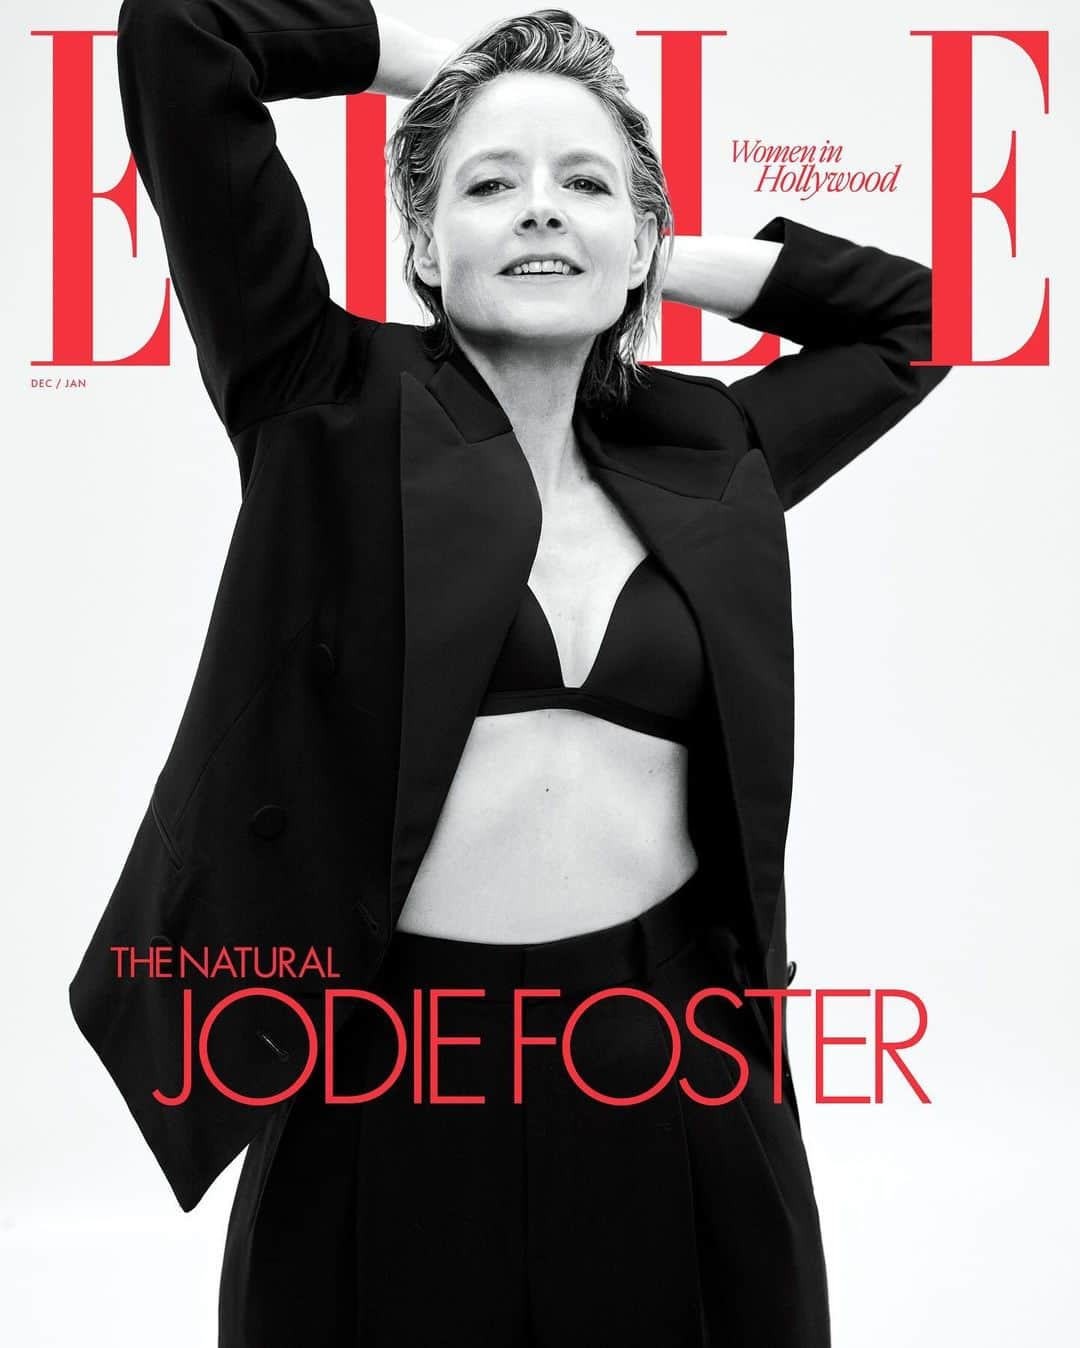 Polo Ralph Laurenのインスタグラム：「Academy Award–winning actress #JodieFoster is featured on the cover of @ElleUSA in our #PoloRalphLauren Silk-Lapel Double-Breasted Wool Blazer.  ELLE: @ElleUSA Editor-in-Chief: @NinaGarcia Talent: Jodie Foster  Photographer: @ZoeyGrossman Stylist: @AlexWhiteEdits Writer: @SaradAustin Hair: @HairbyAdir @AFrame_Agency Makeup: @PatiDubroff @Chanel.Beauty Manicure: @Ashlie_Johnson @TheWallGroup Production: @LolaProduction  #PoloRLStyle #RLEditorials」